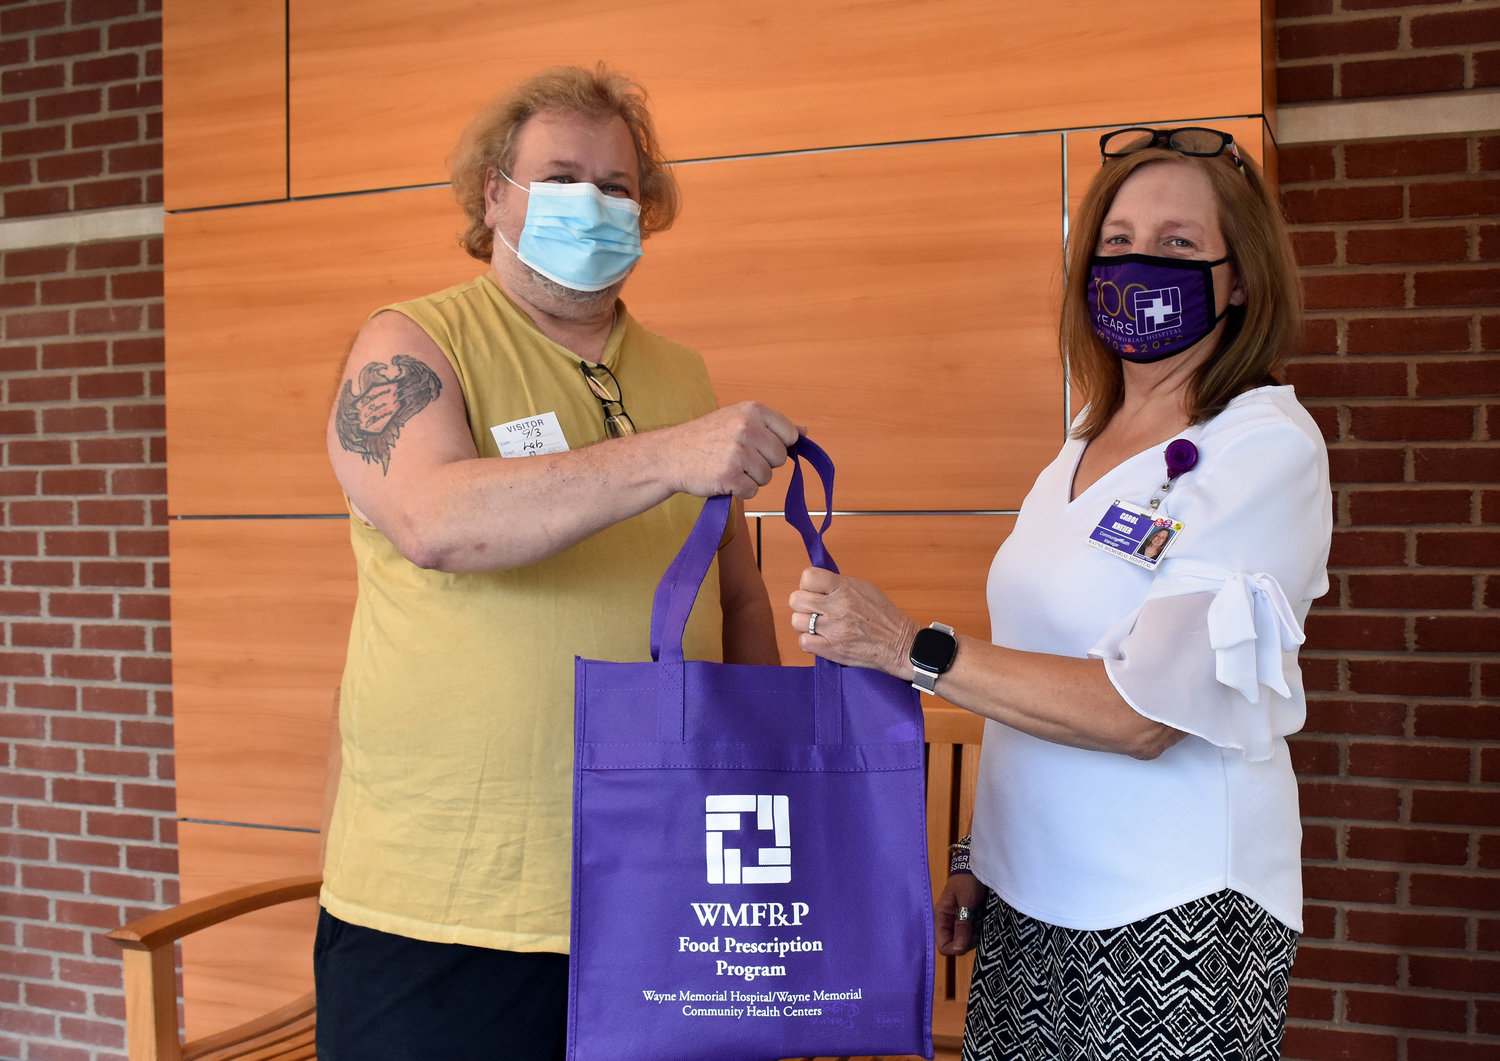 Wayne Memorial's food prescription program was funded after feedback was received from a 2019 survey. Pictured are George Barton, left, and Carol Kneier.